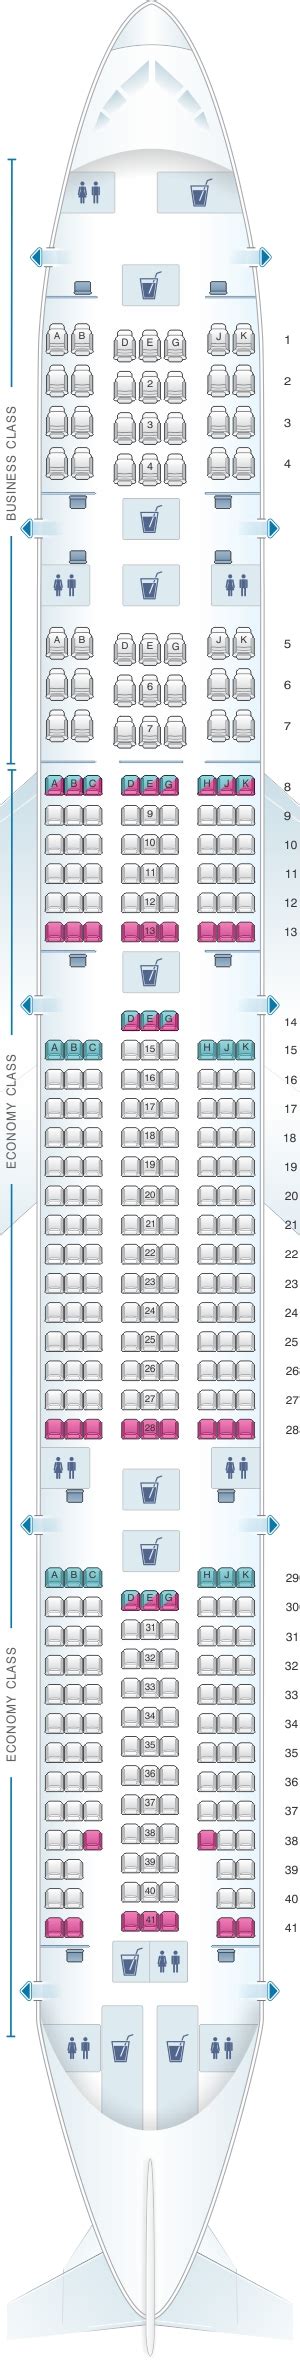 Pics Turkish Airlines Seat Selection And View Alqu Blog